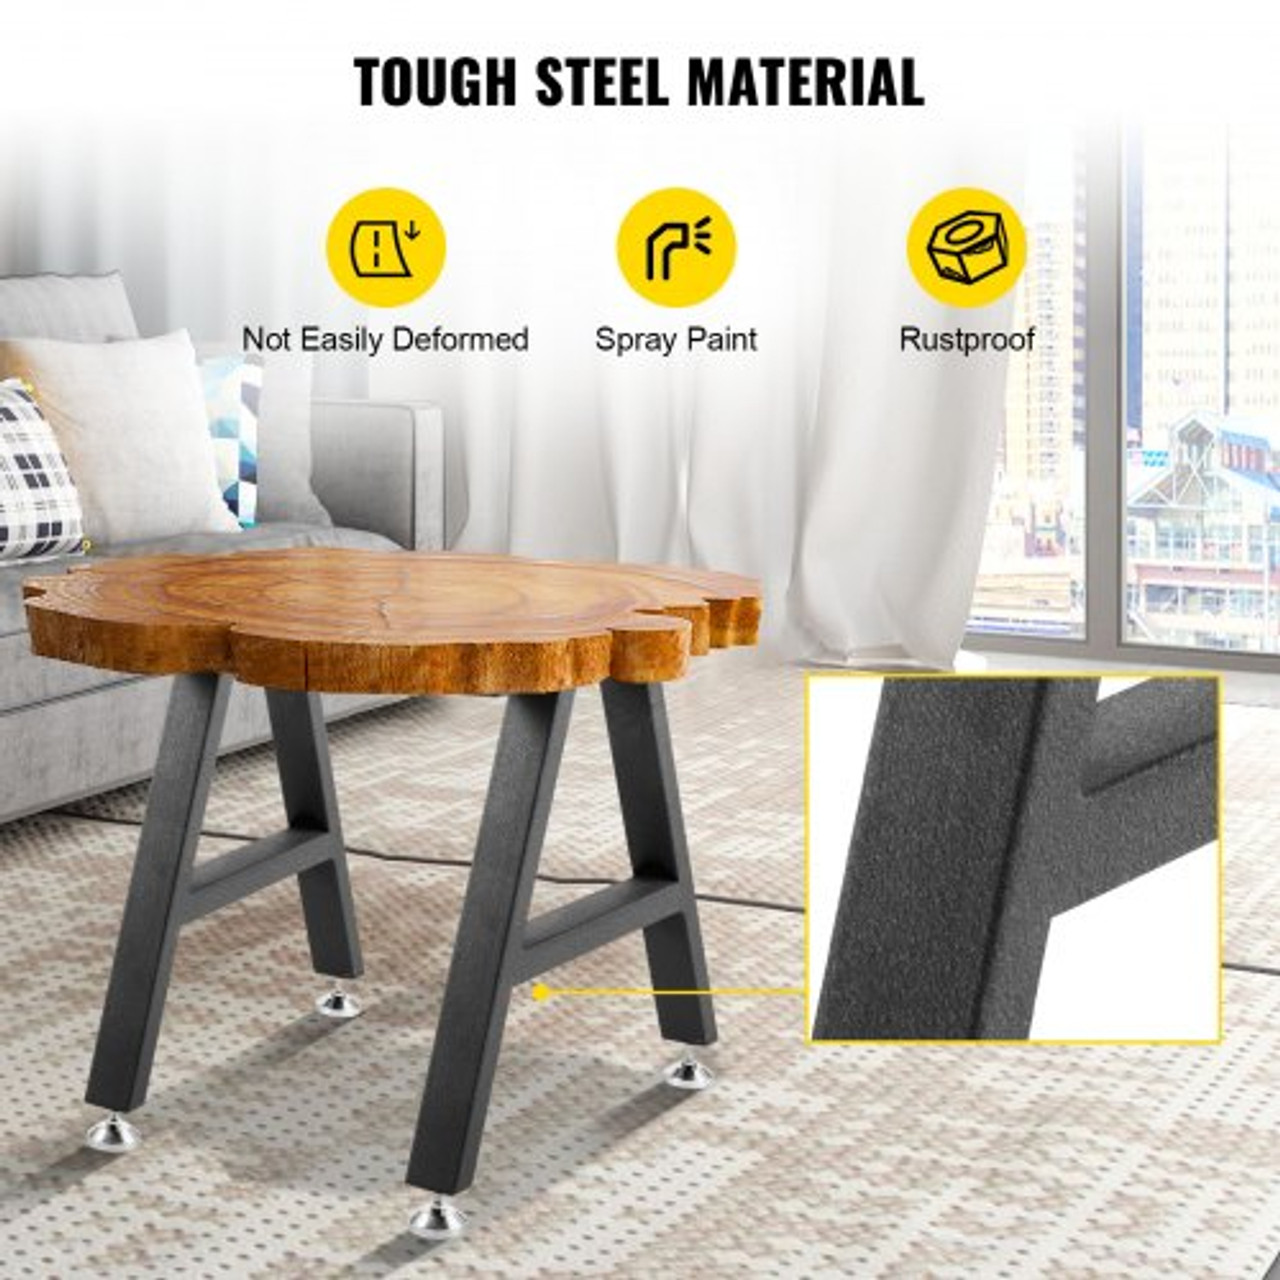 Metal Table Legs 16 x 17.7 inch A-Shaped Desk Legs Set of 2 Heavy Duty Bench Legs w/Polyurethane Coating, Furniture Legs w/ Floor Protectors, Wrought Iron Coffee Table Legs for Home DIY Black